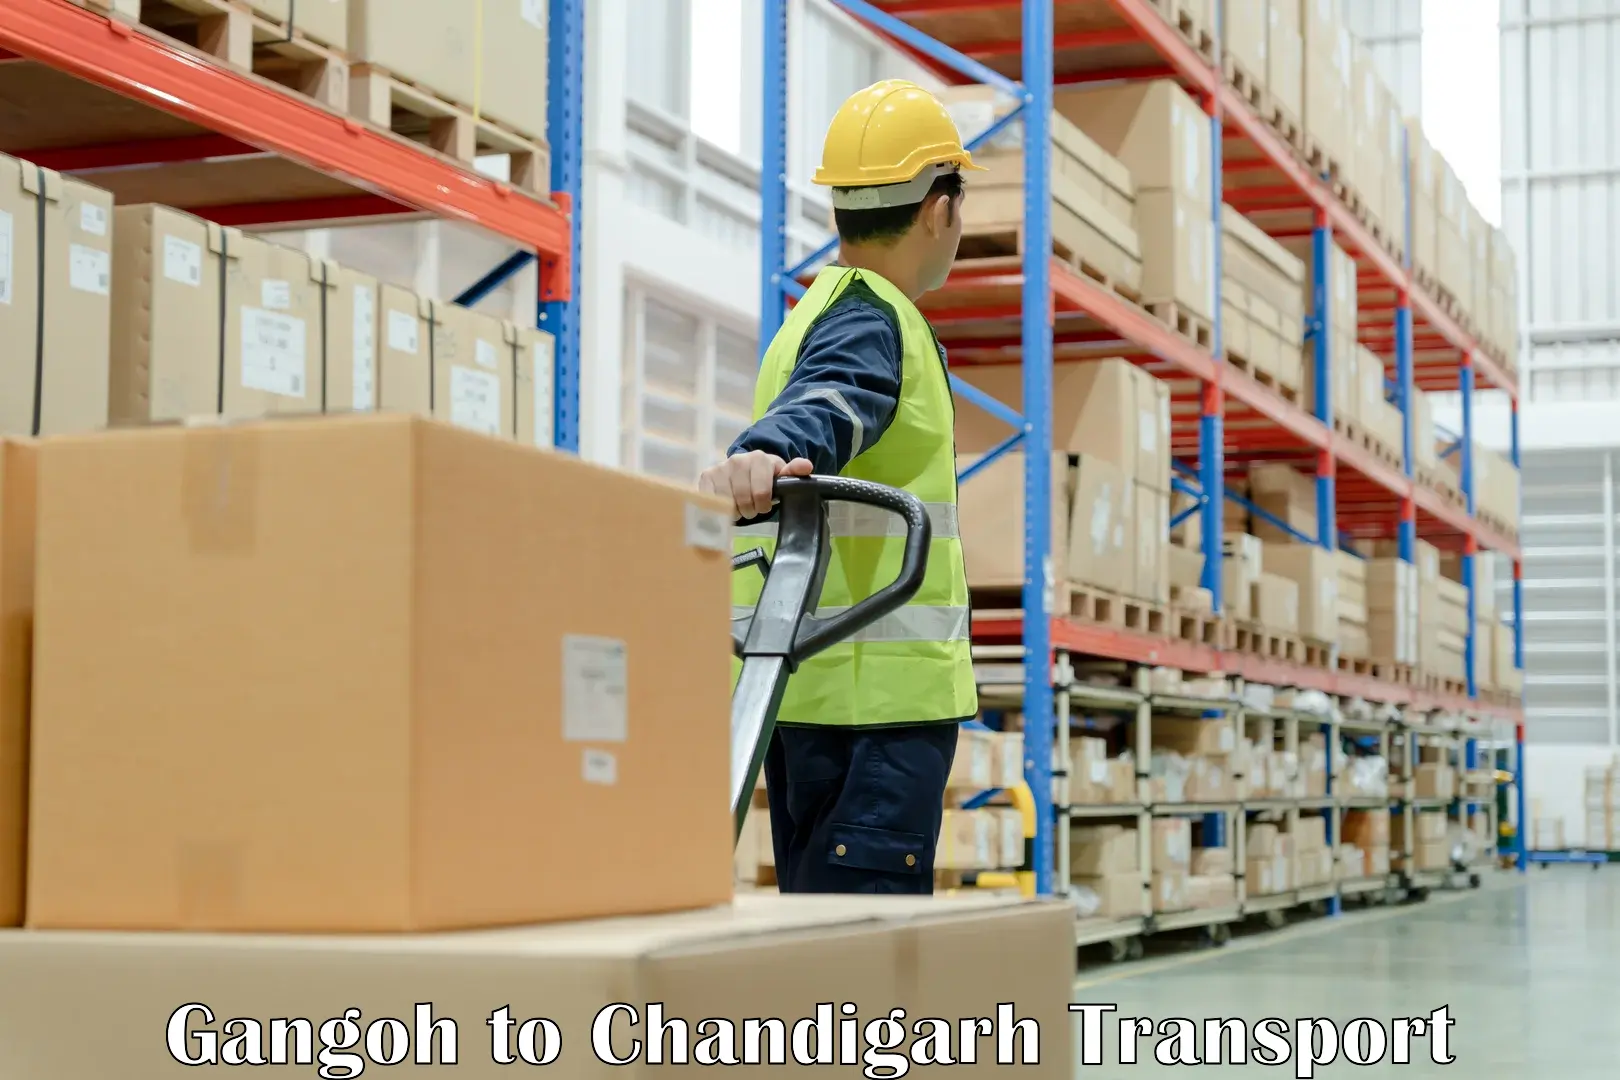 Goods delivery service Gangoh to Chandigarh